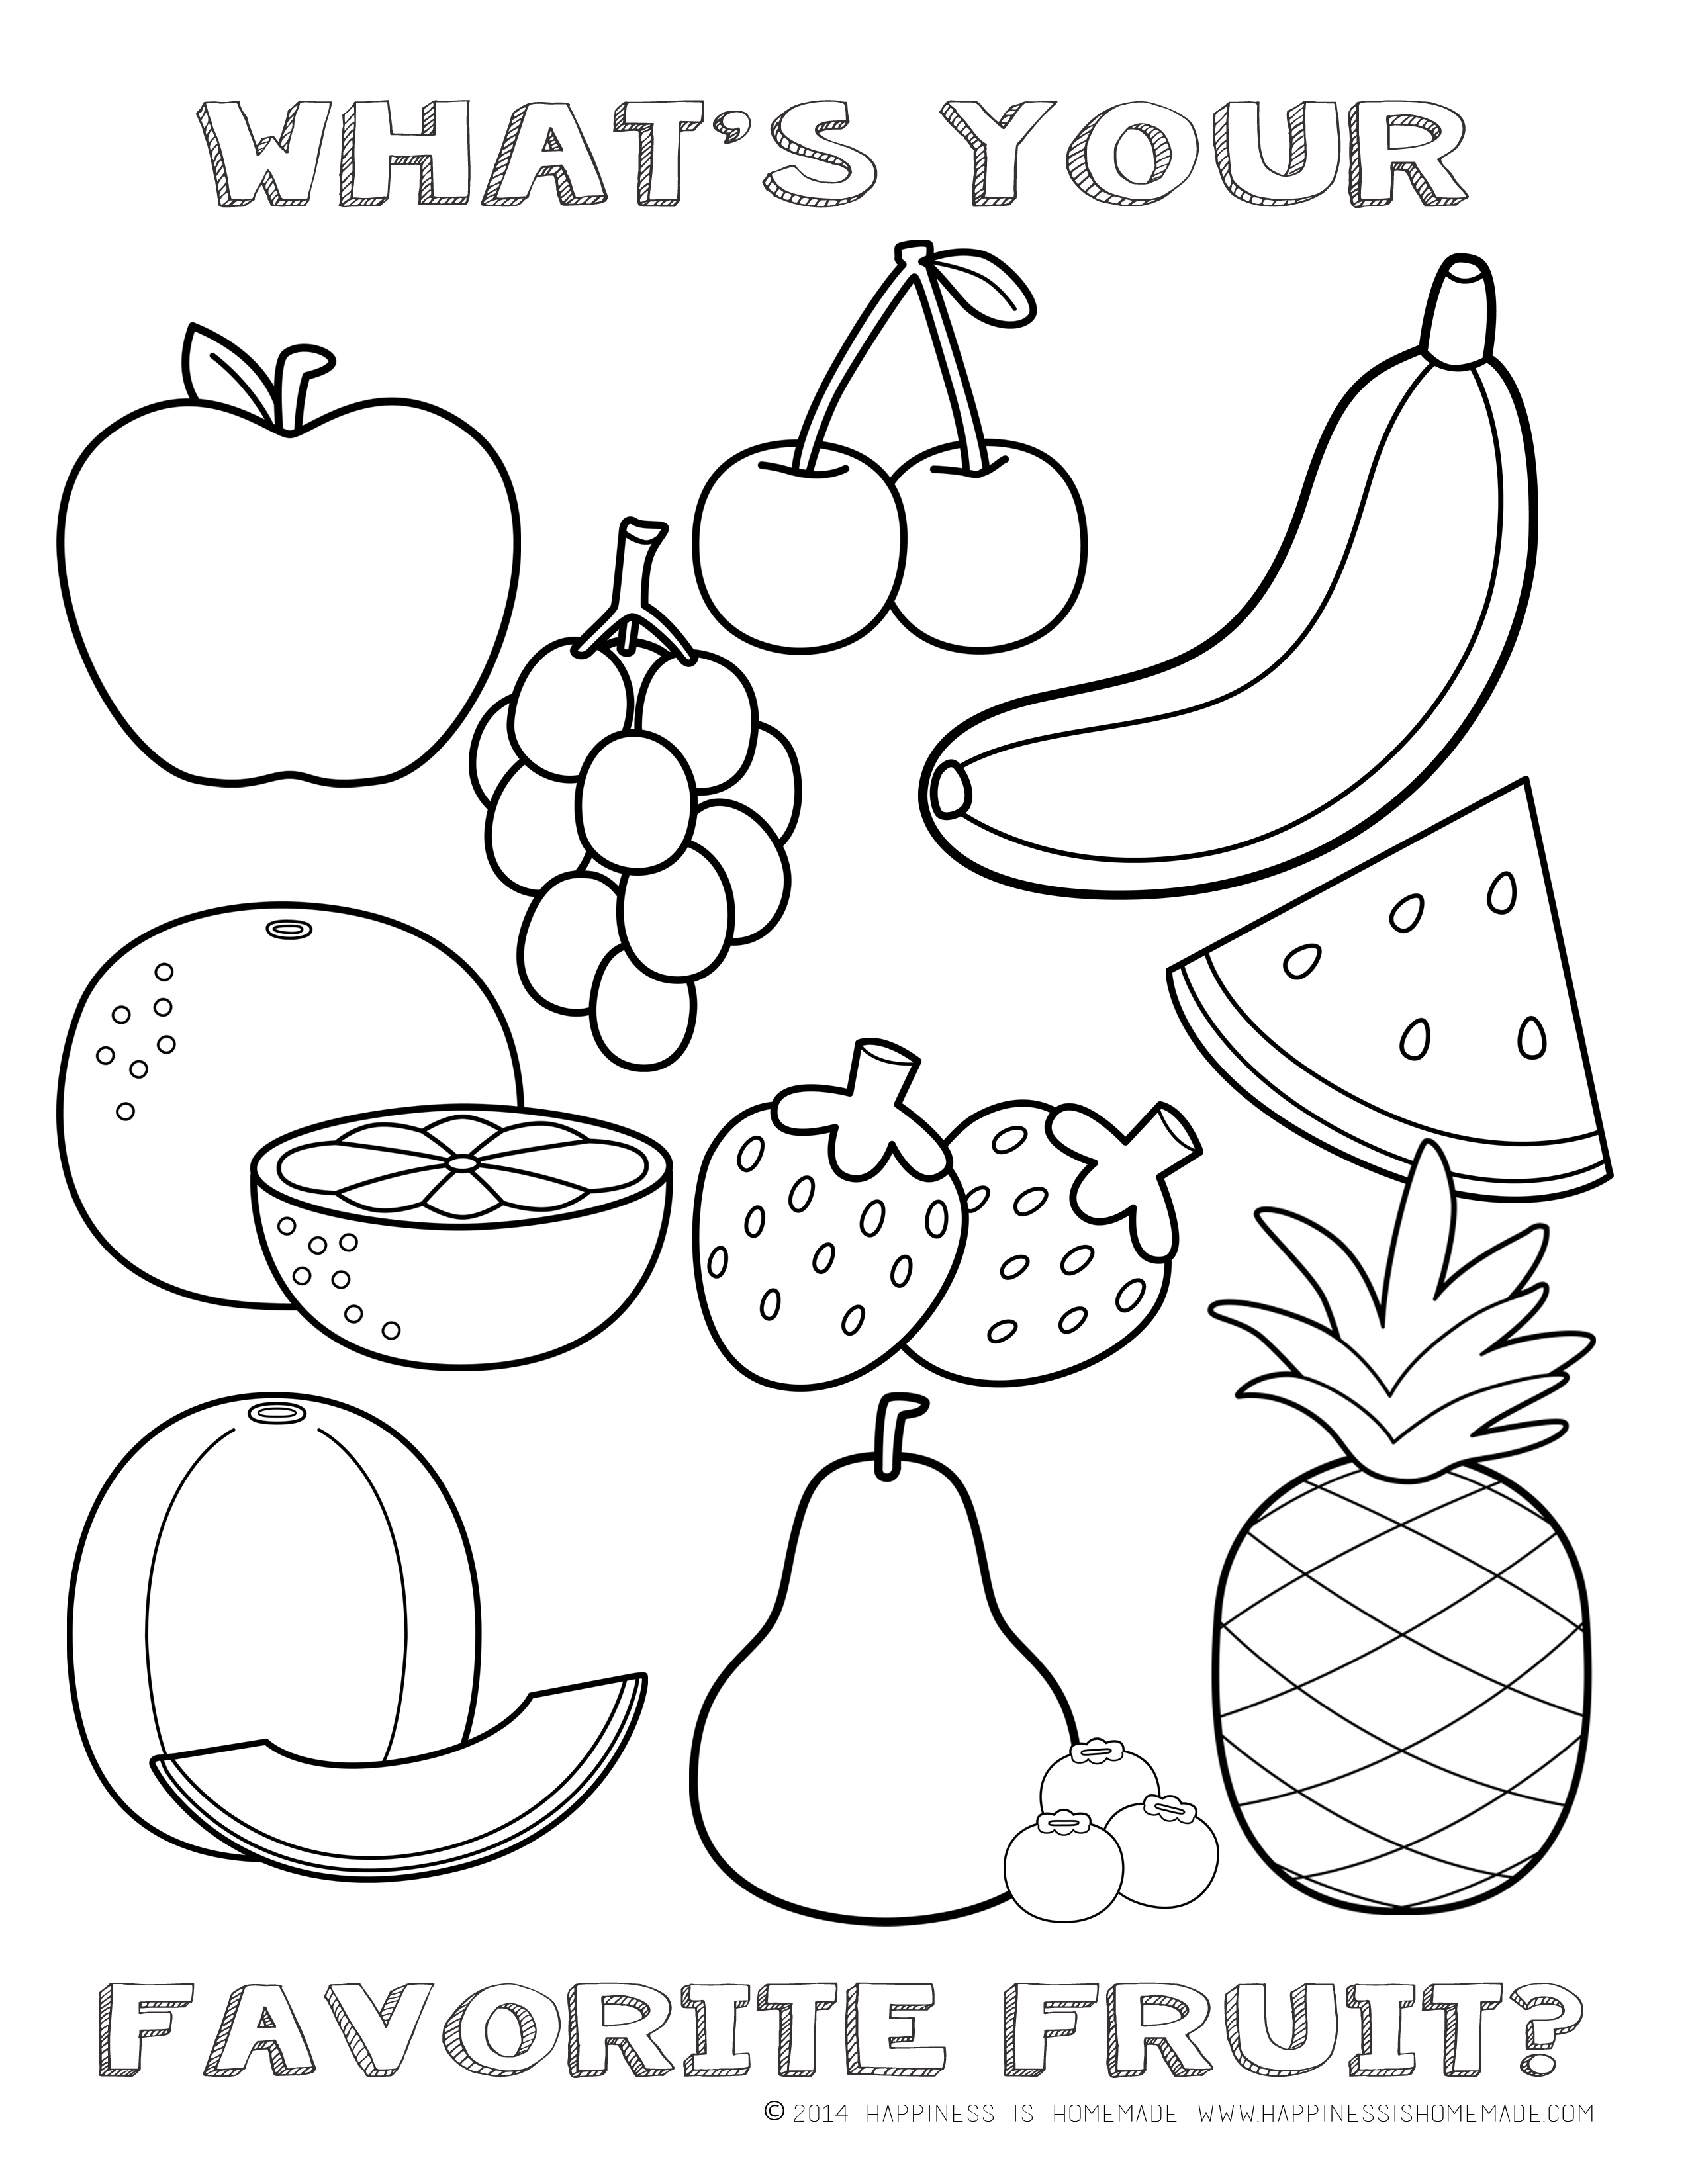 Fruit salad coloring pages download and print for free